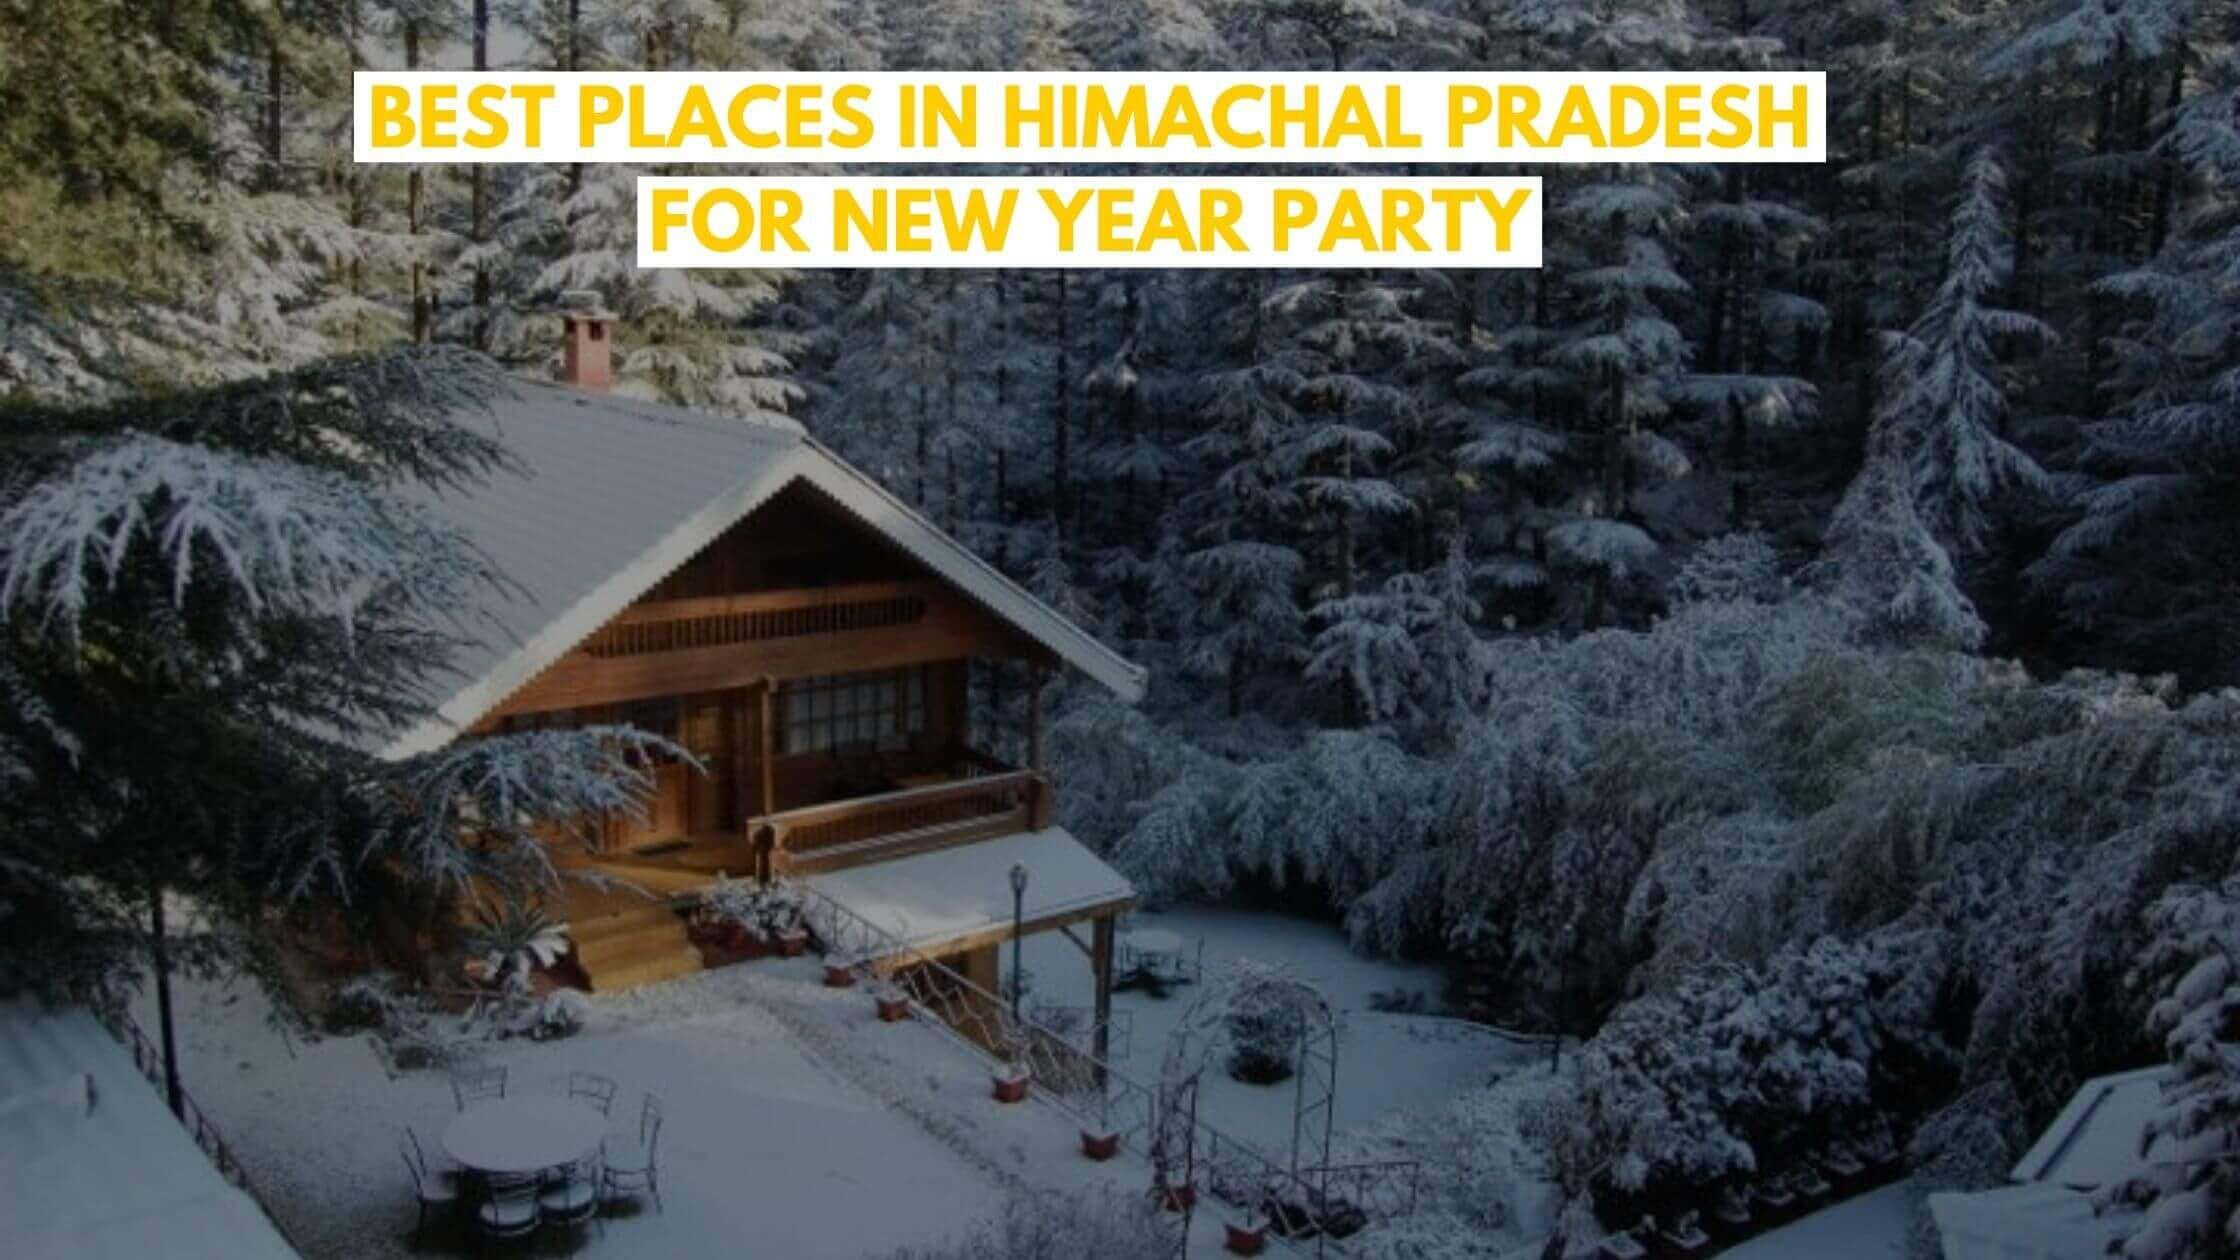 Best Places in Himachal Pradesh for New Year Party (2021)